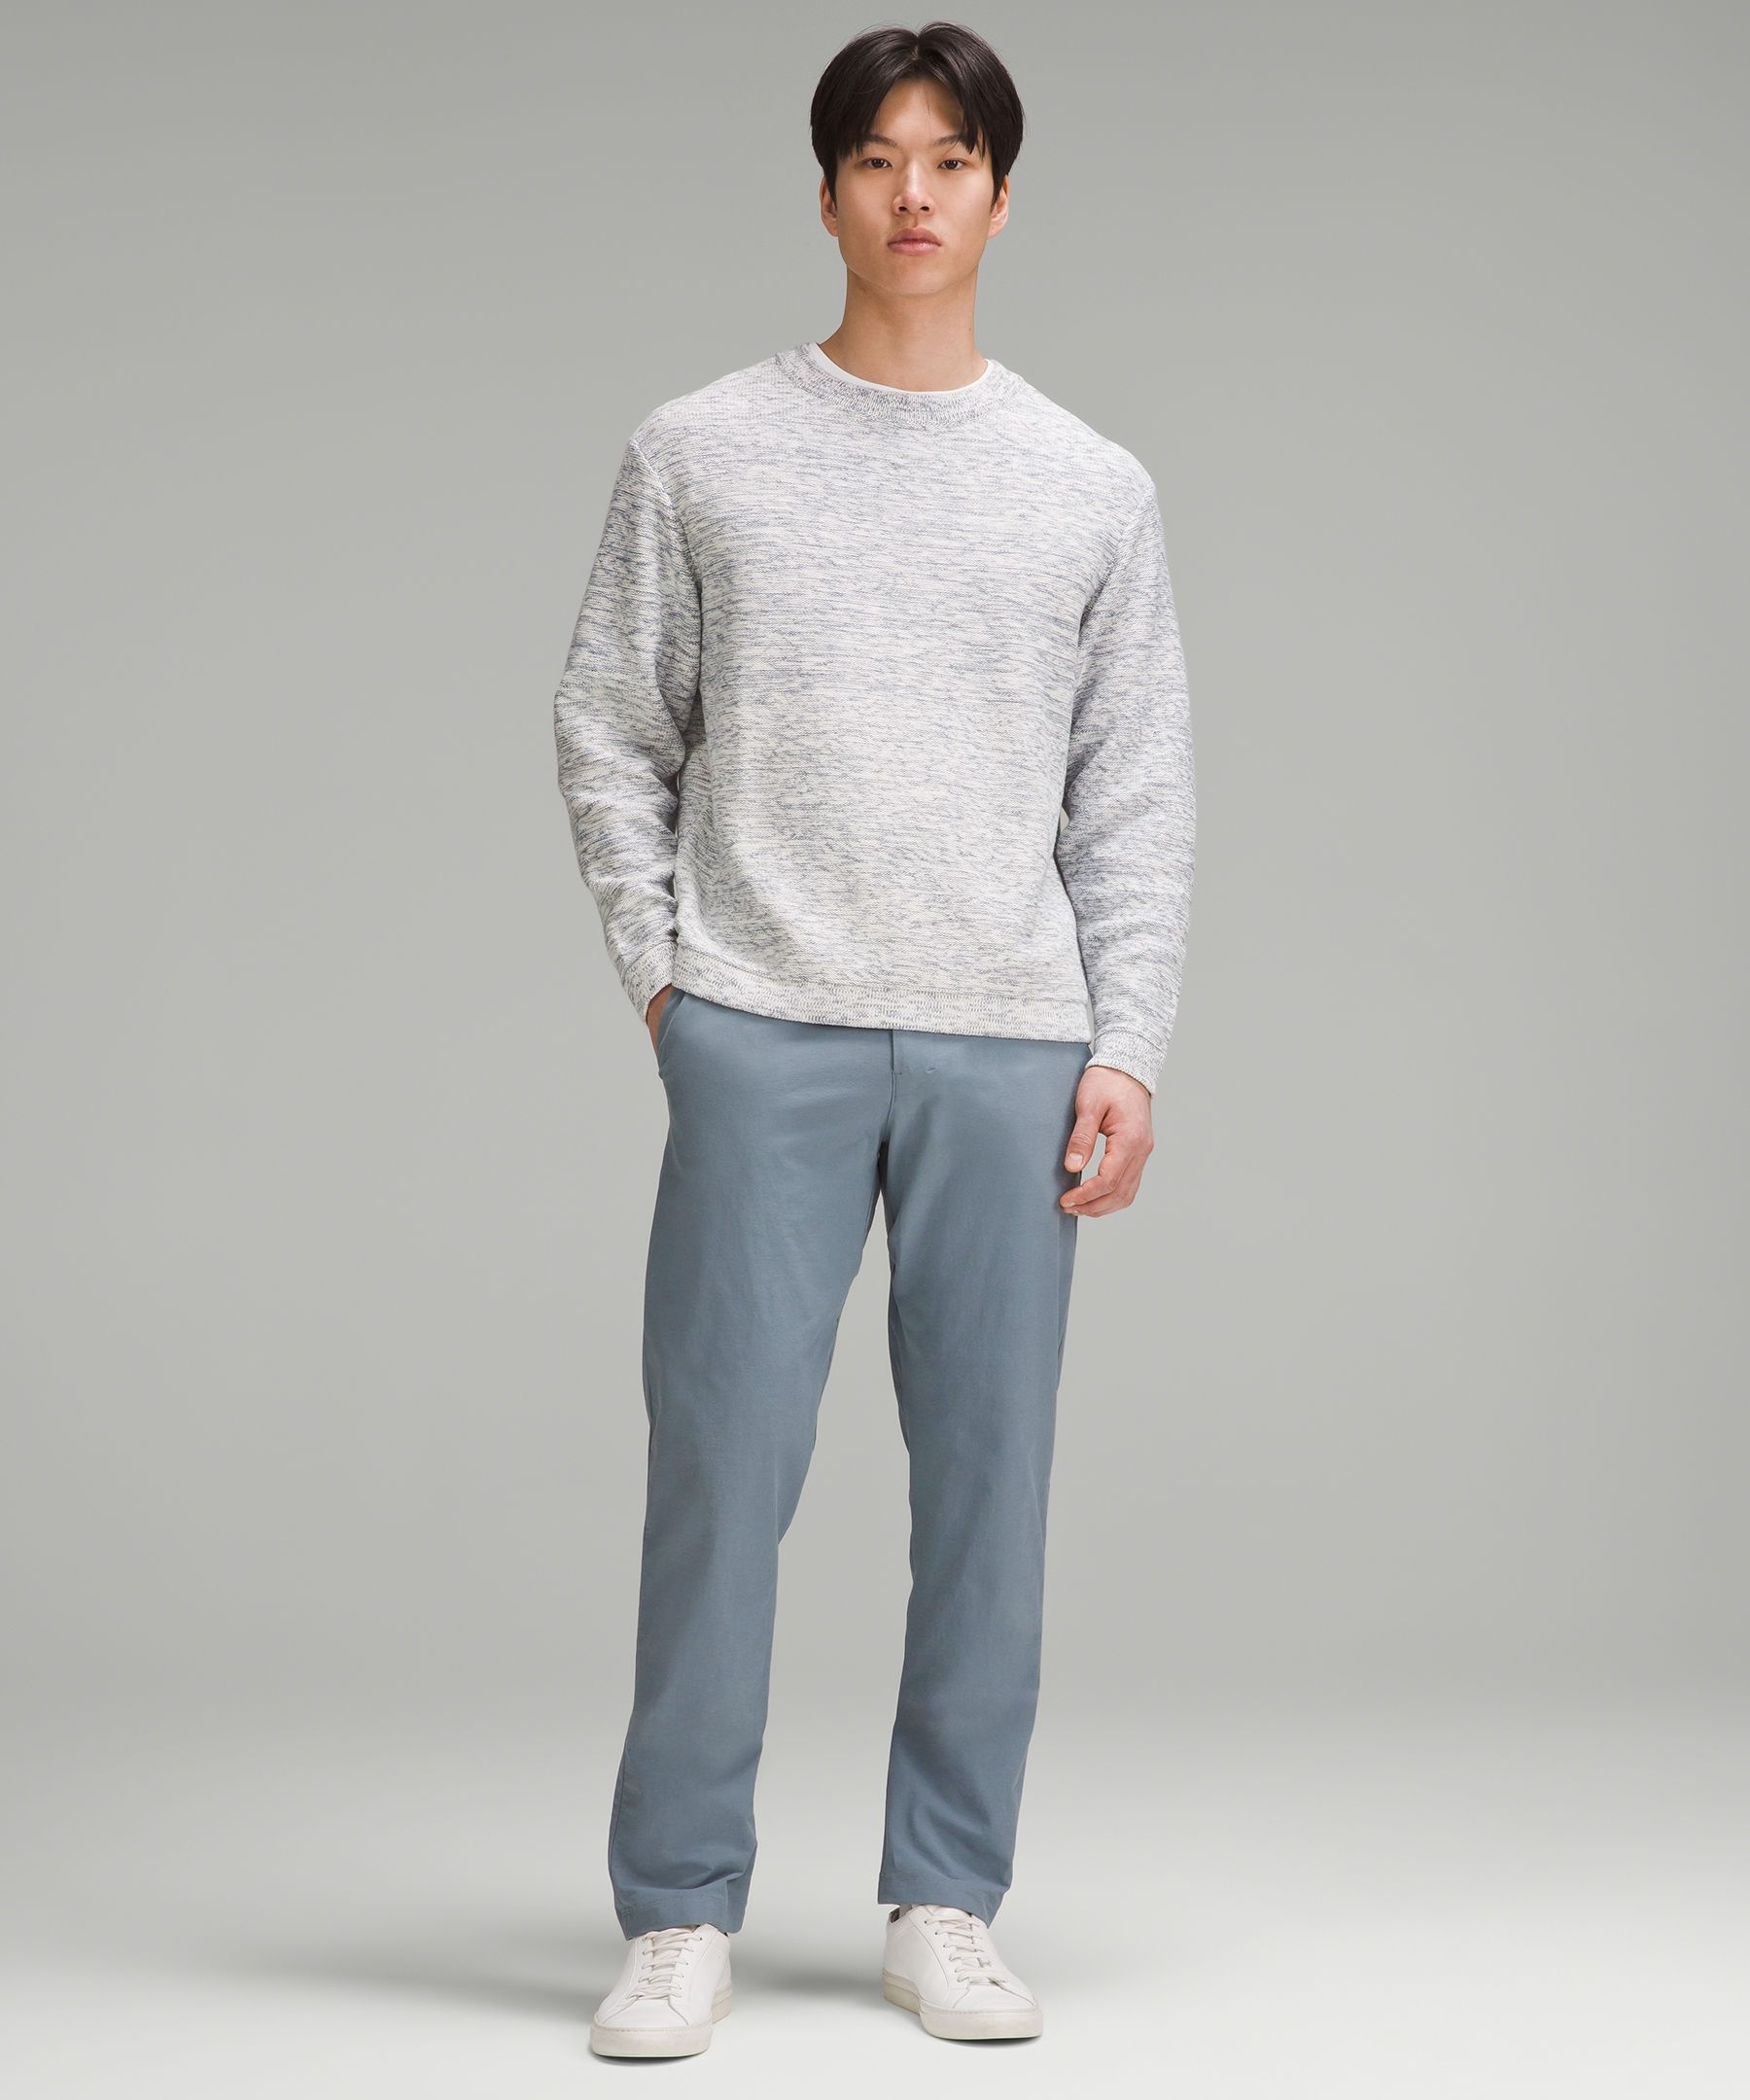 Relaxed-Fit Crewneck Knit Sweater - 2